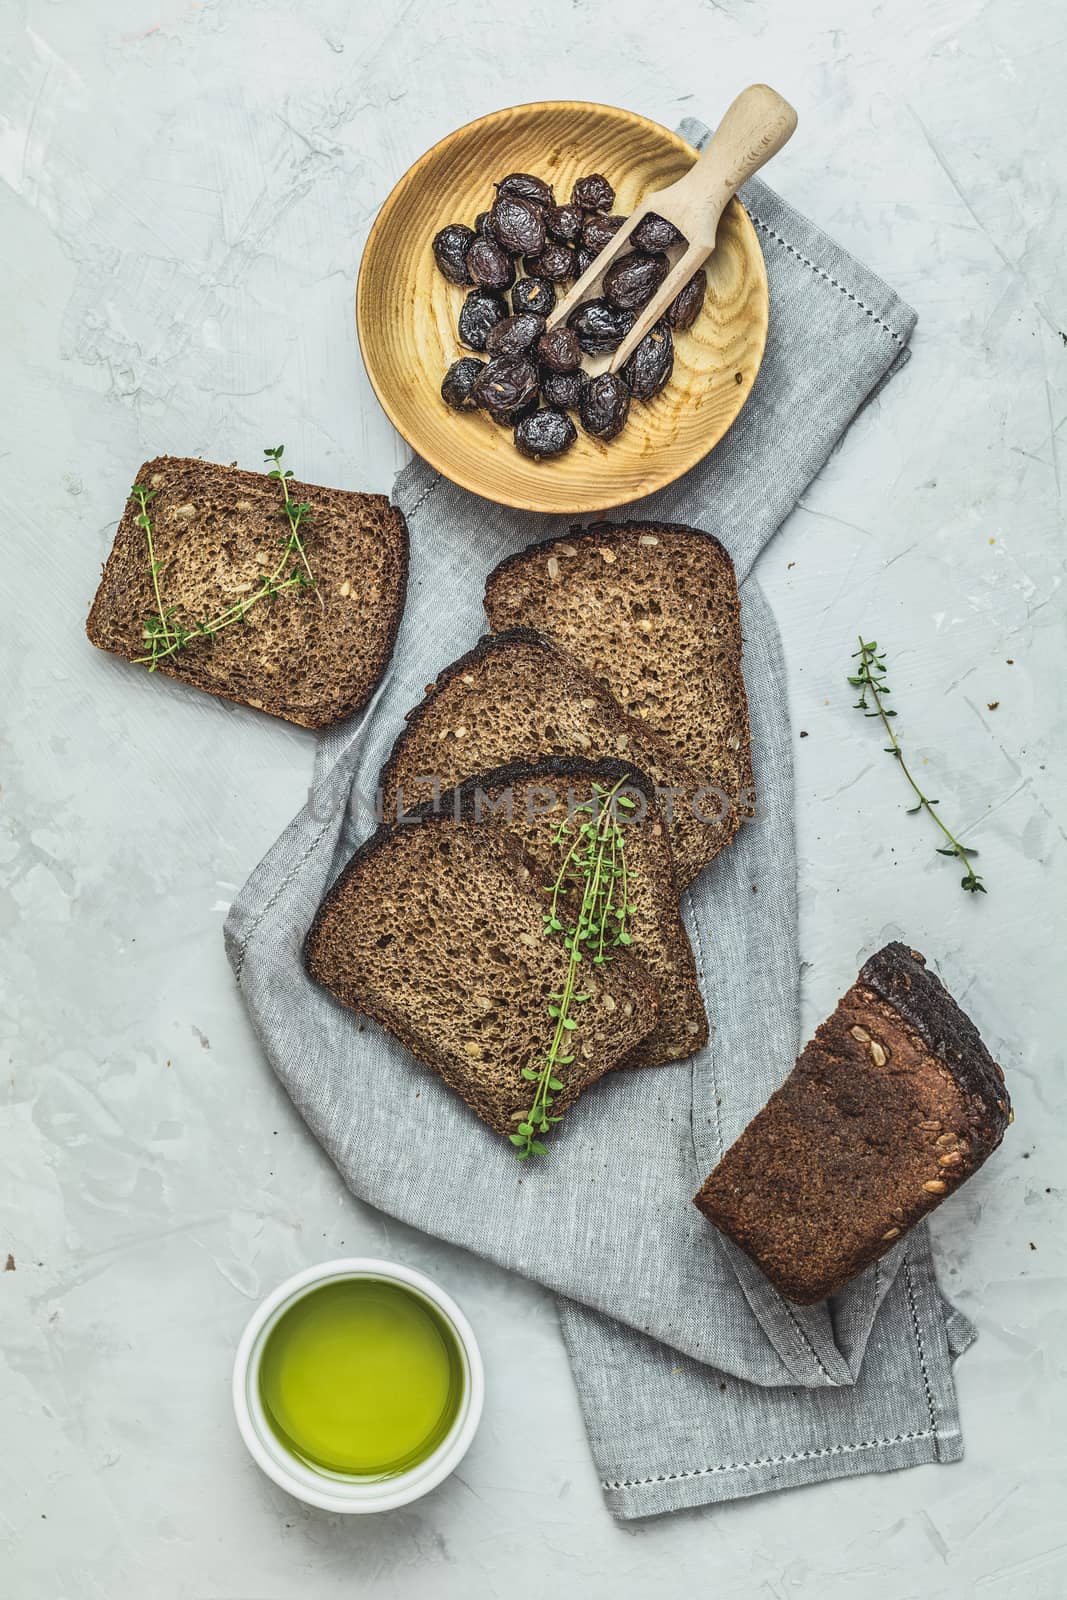 Whole wheat bread baked at home and dried olives by ArtSvitlyna